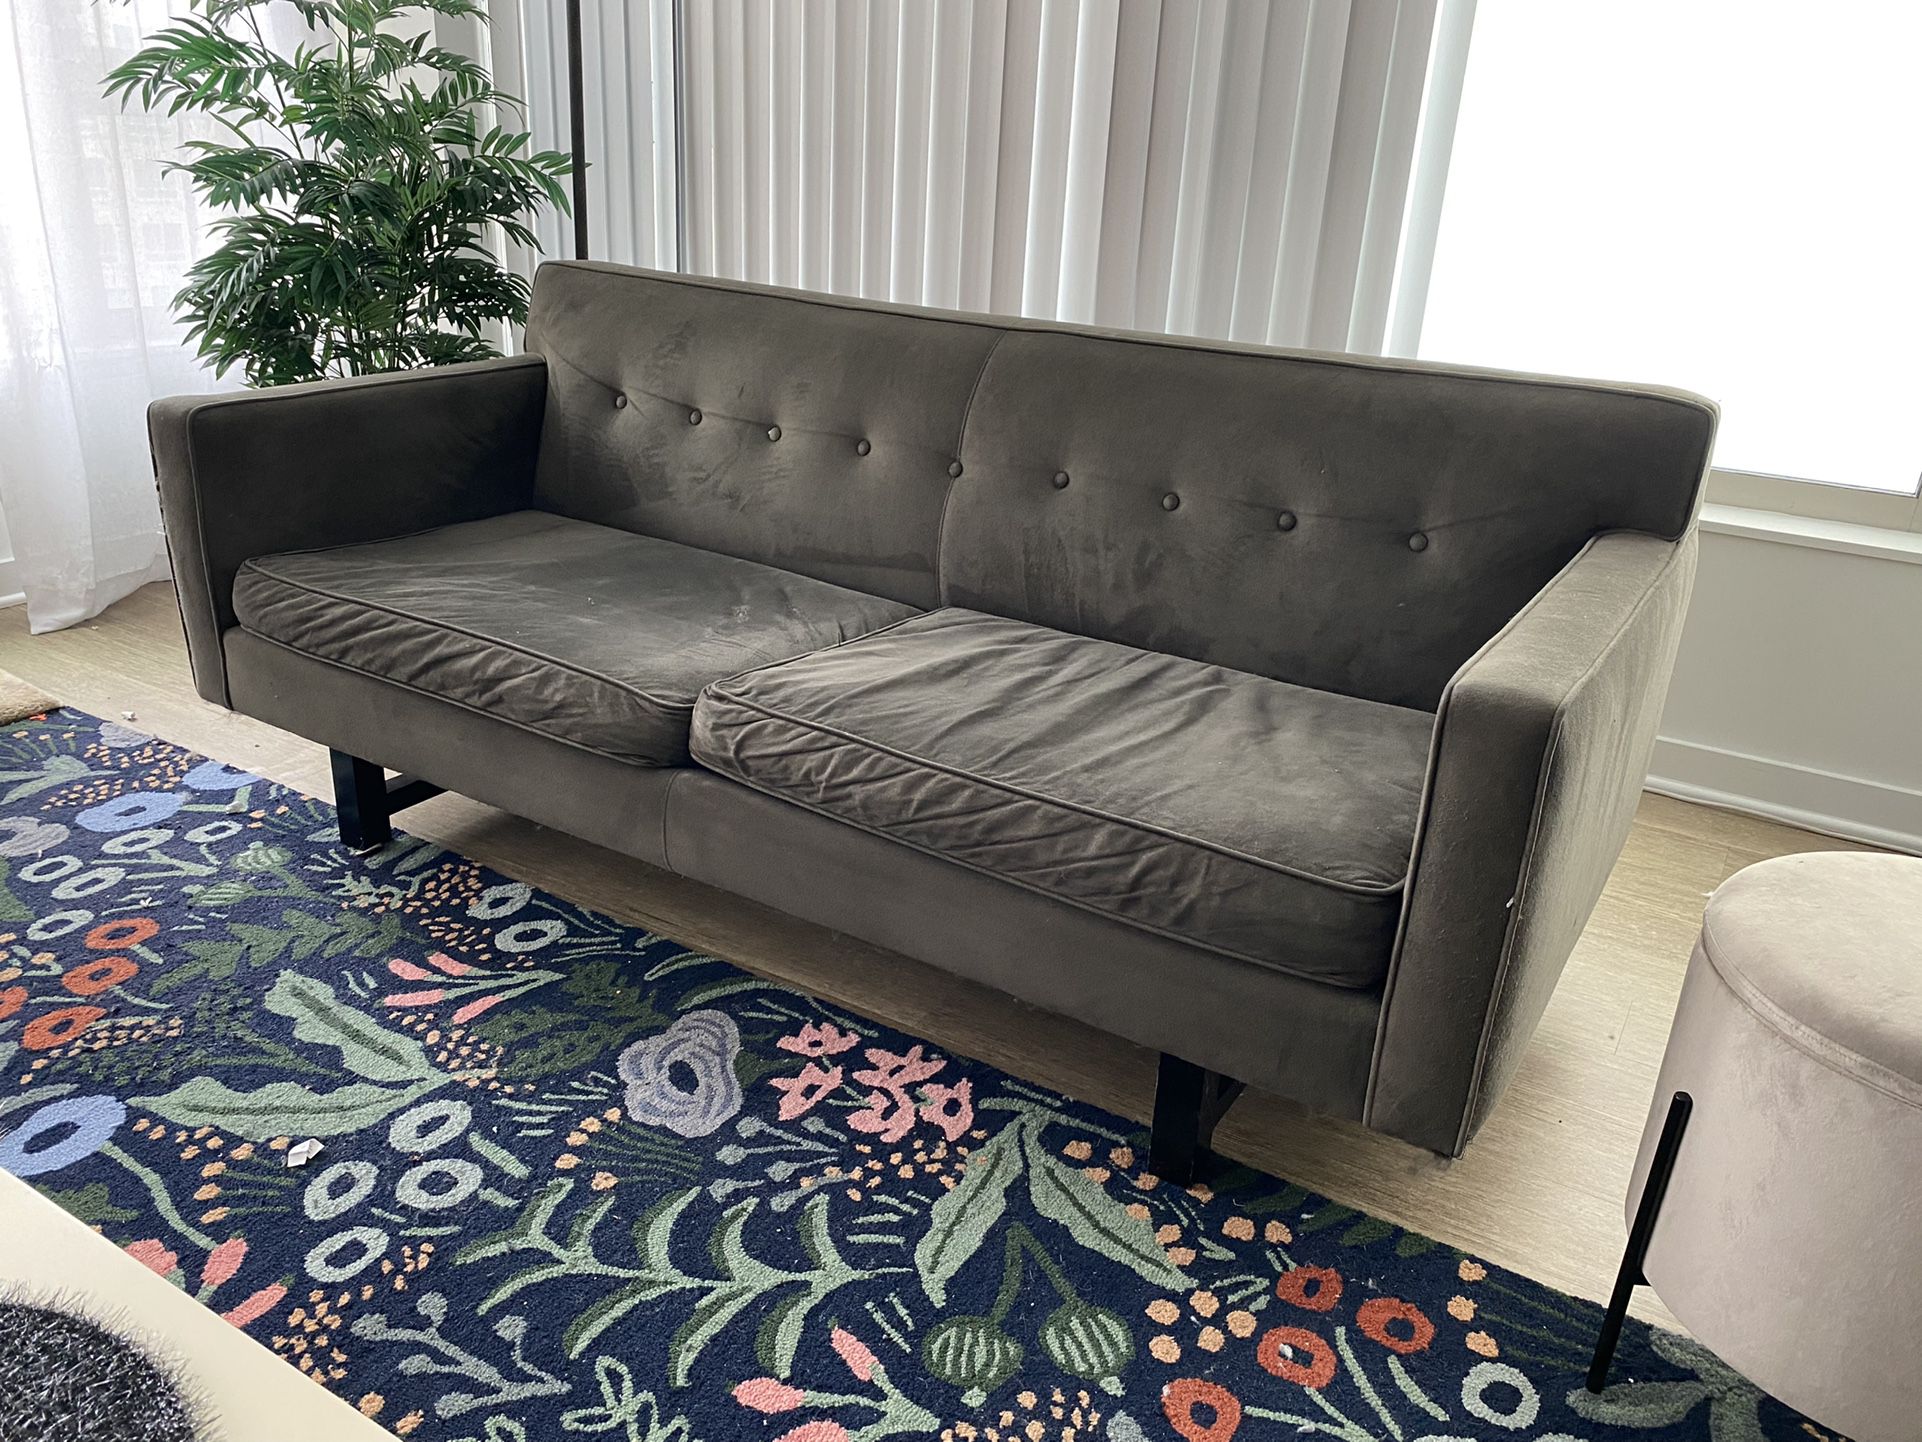 FREE - 75” Gray Room and Board Couch 